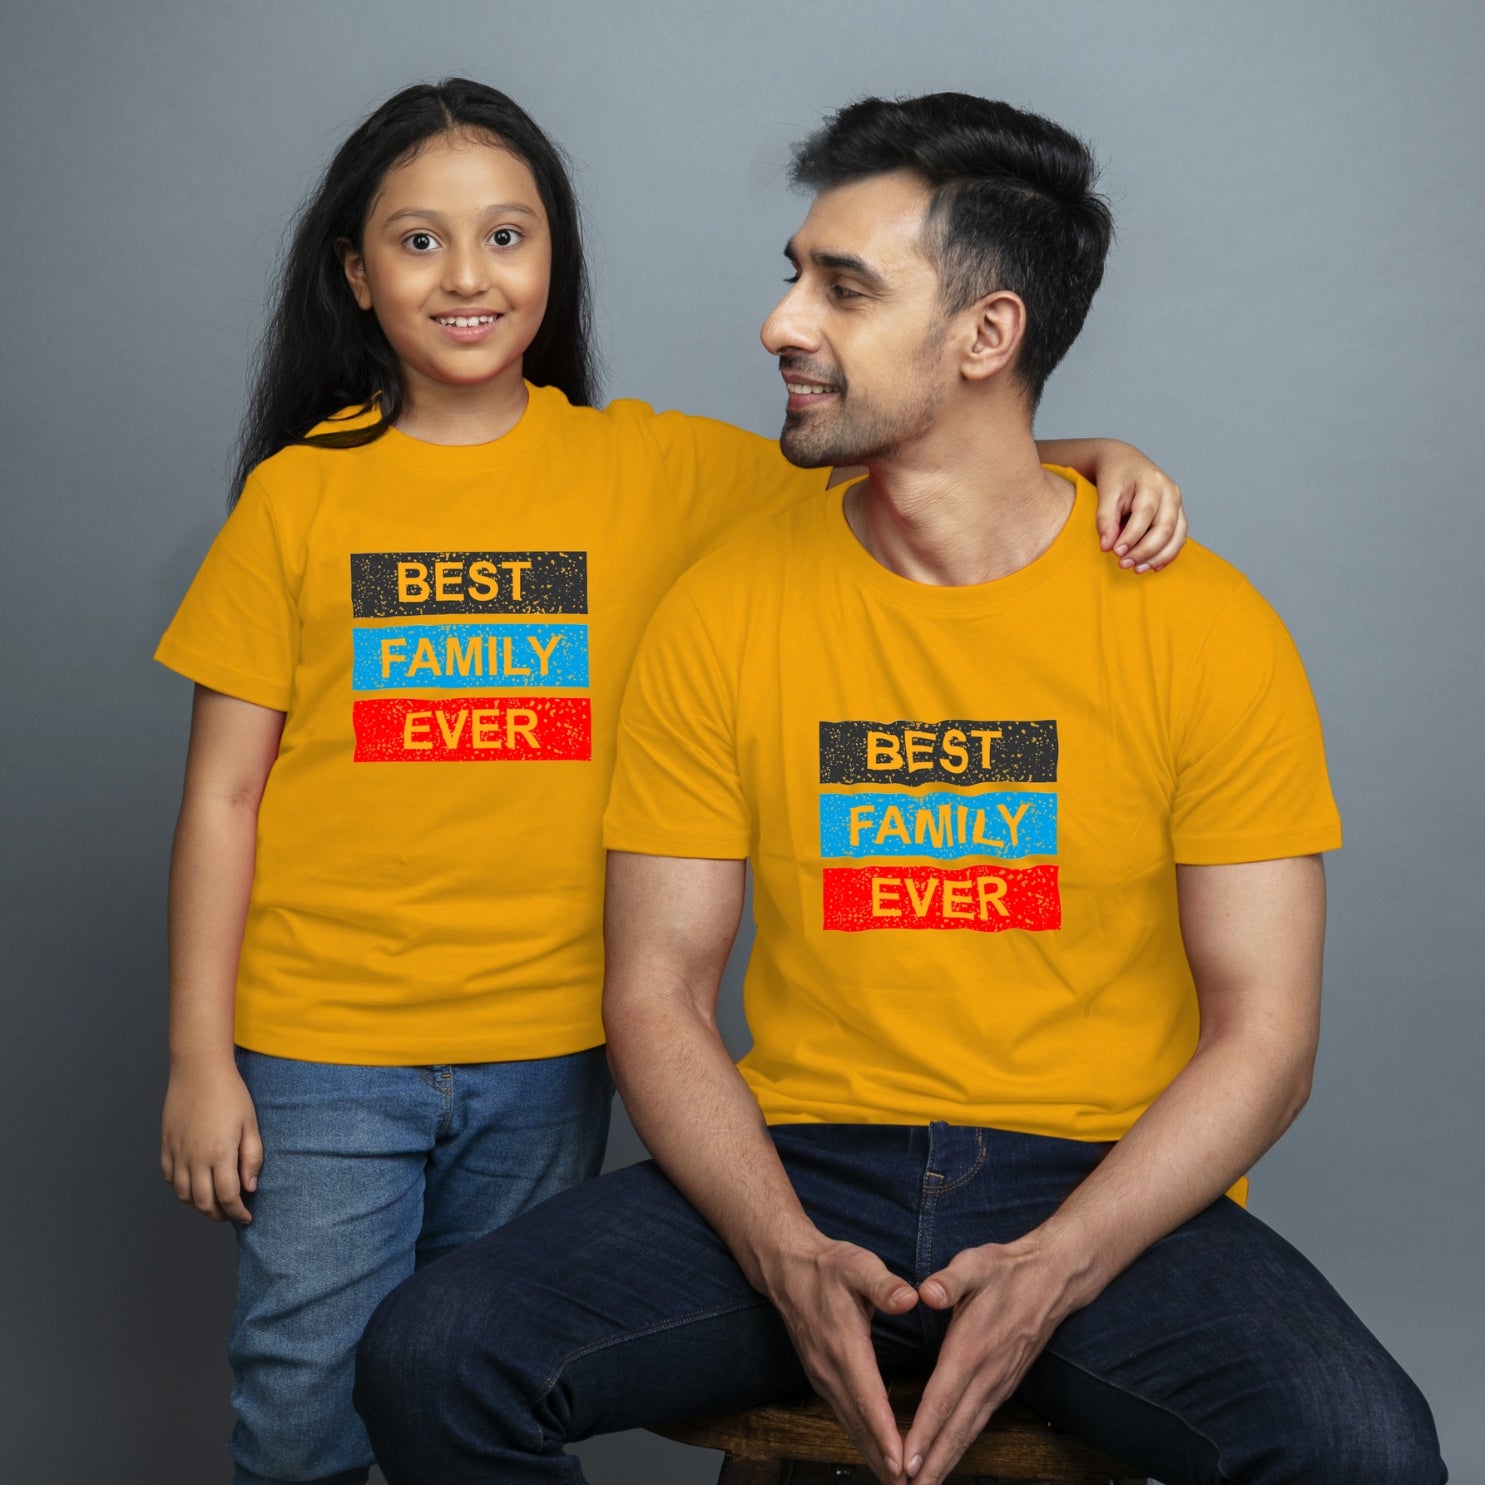 Family of 2 t shirt for Dad Daughter in Yellow Colour- Best Family Ever Variant